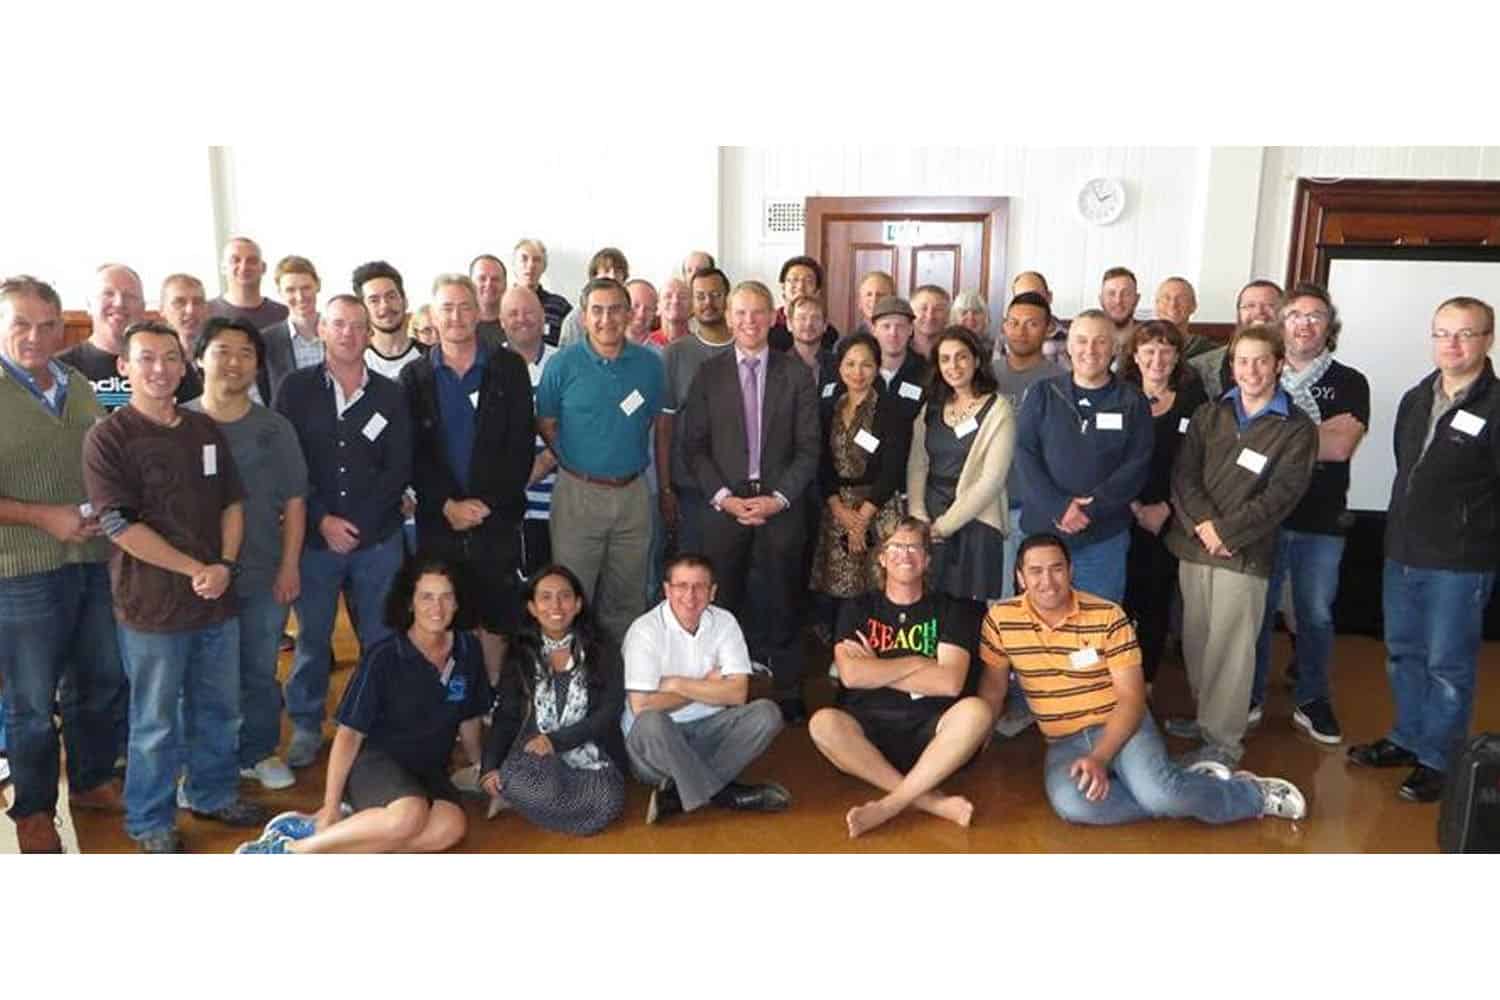 Men In Early Childhood Education National Summit. Minister Chris Hipkins standing centre. Dr Sarah Alexander (organiser) seated front left.